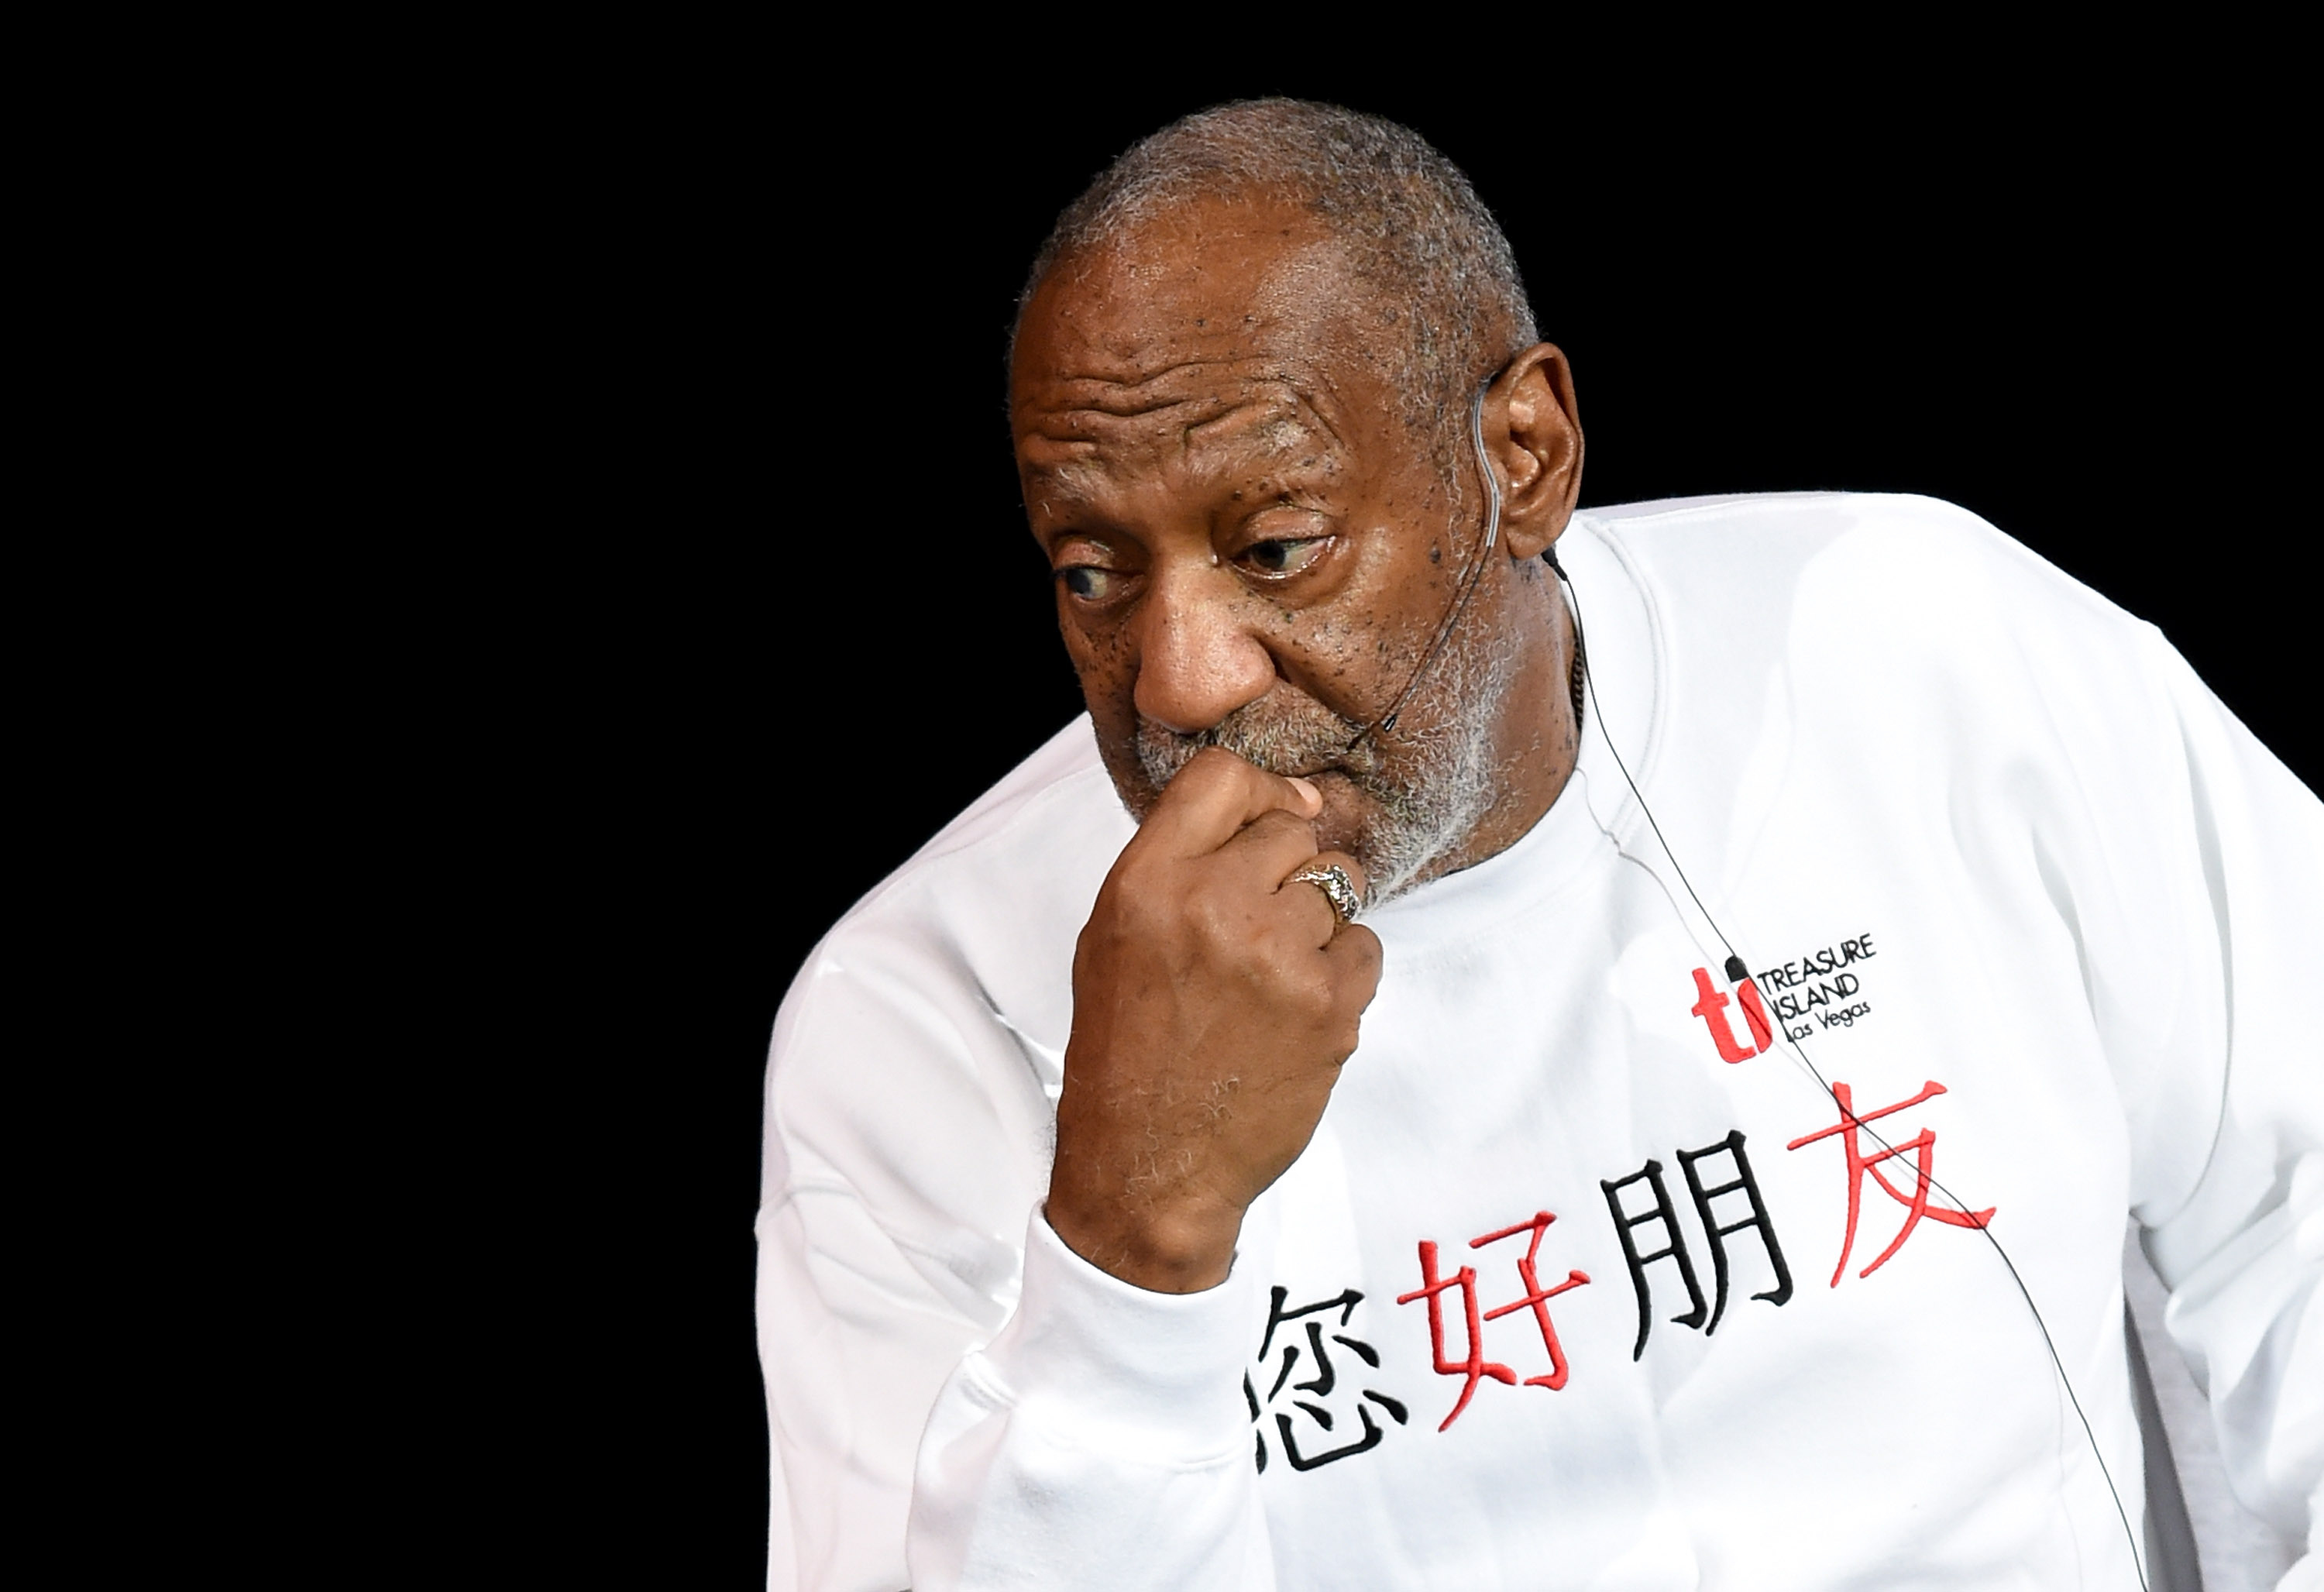 Bill Cosby timeline: From past allegations to the unfolding frenzy - CBS News